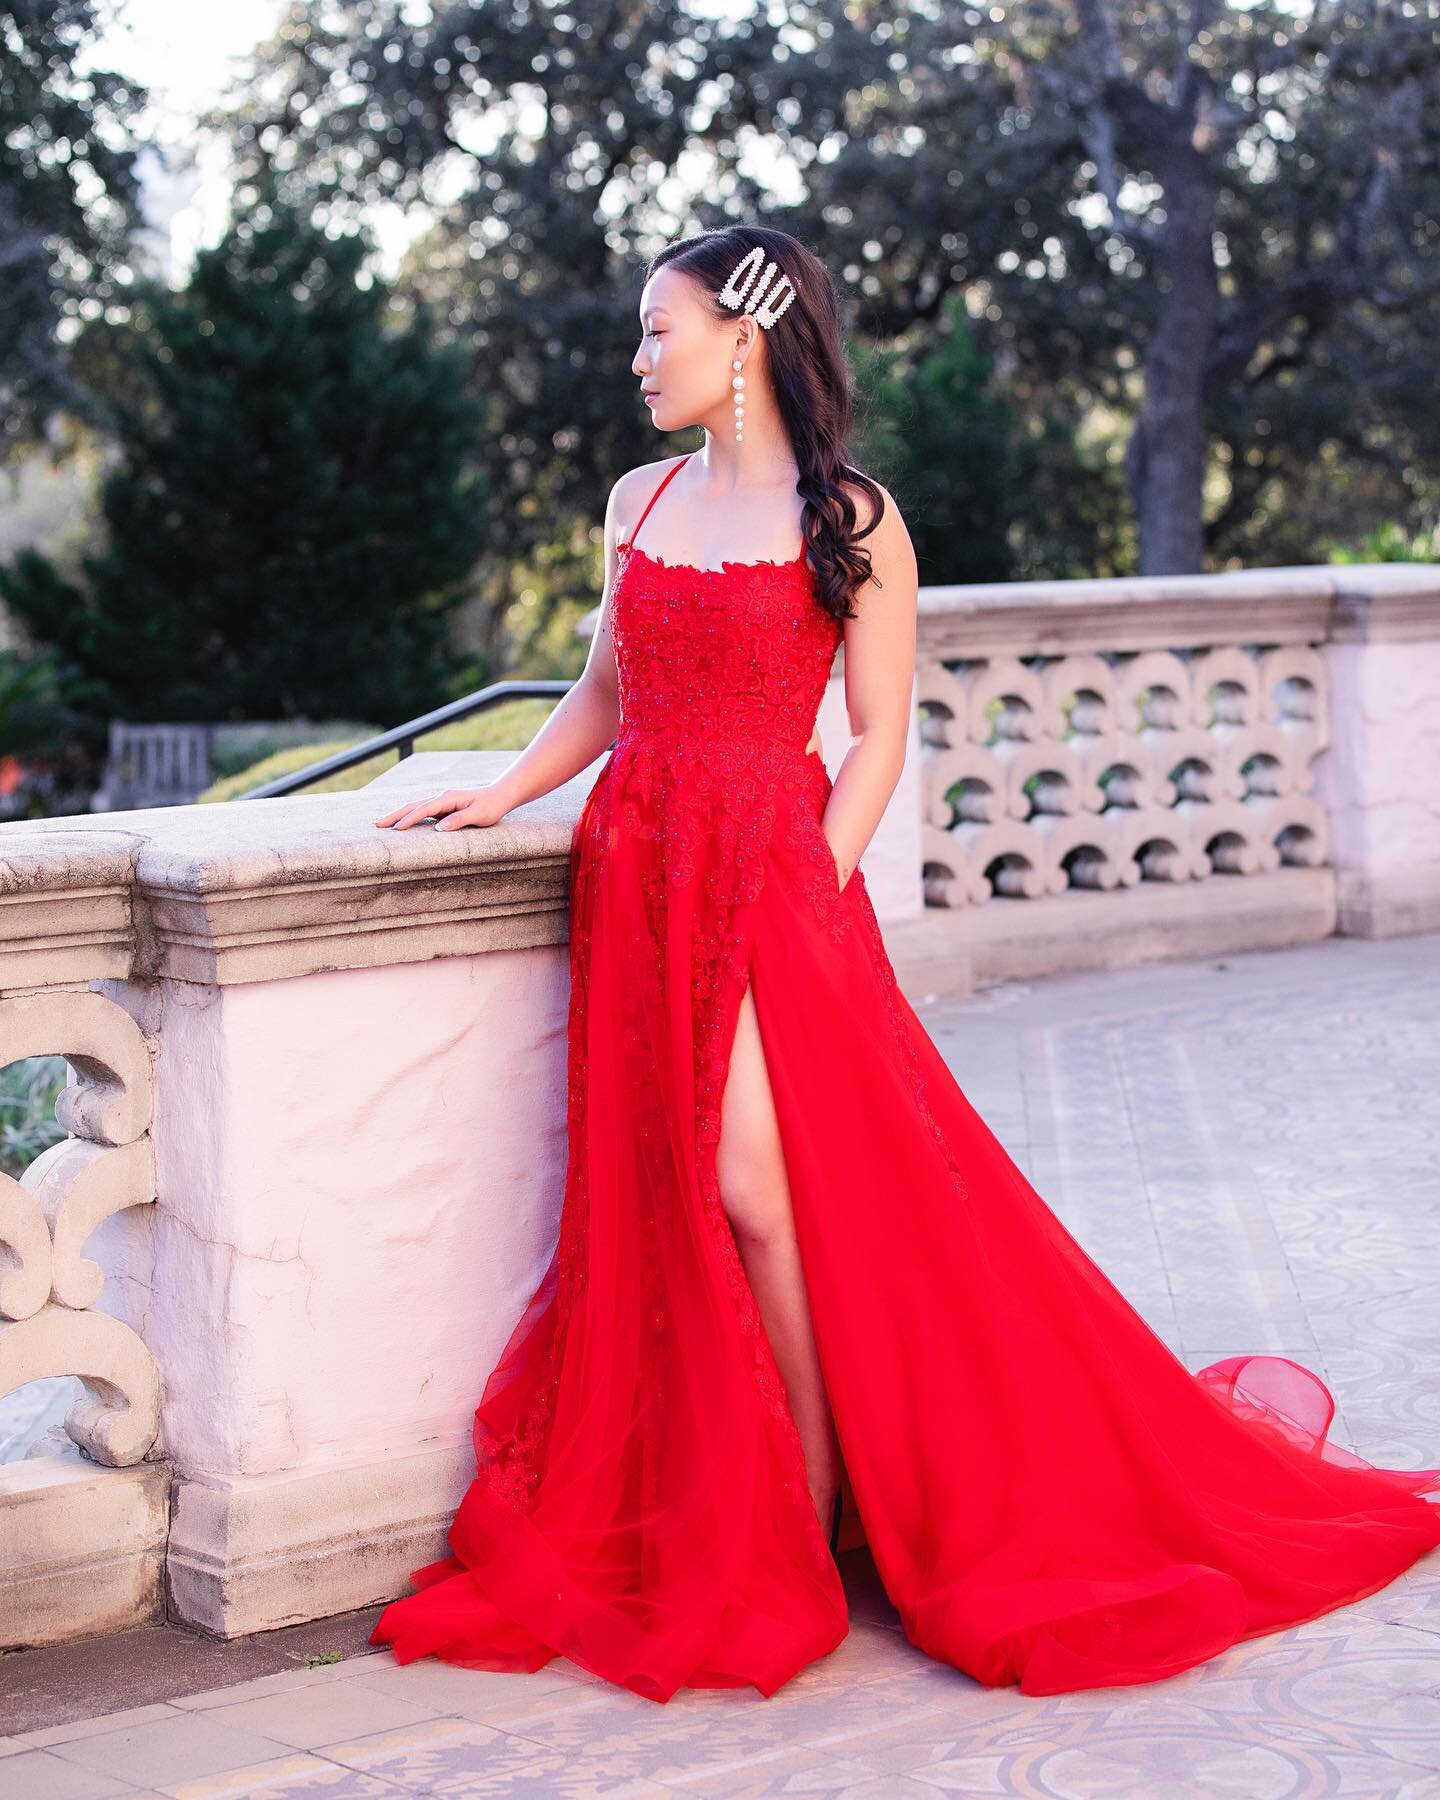 This stunning lady in red is Kayla! 💃🏻⁣
⁣
I&rsquo;m so sad prom season ended so early last year and we weren&rsquo;t able to see all the gorgeous gowns of the season. But, it makes me even more excited to see all the beautiful gowns to come next sp